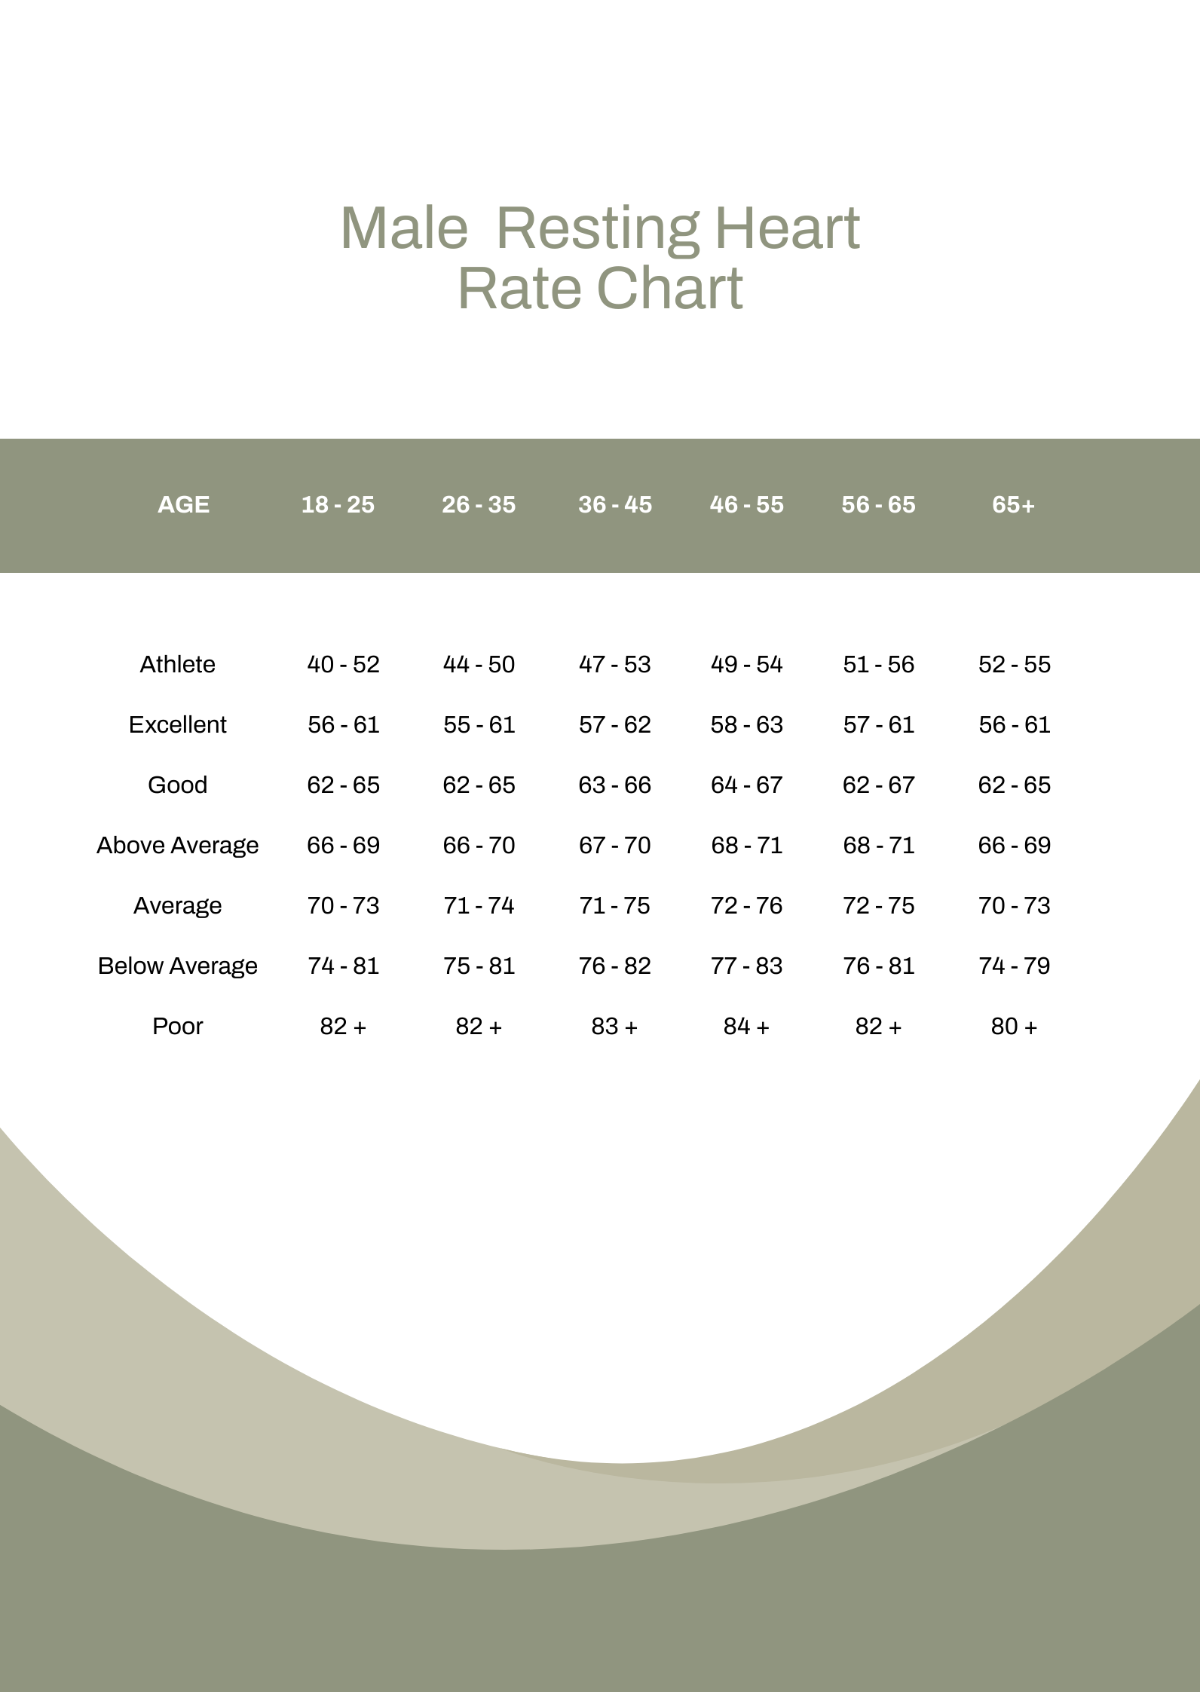 Male Resting Heart Rate Chart Template